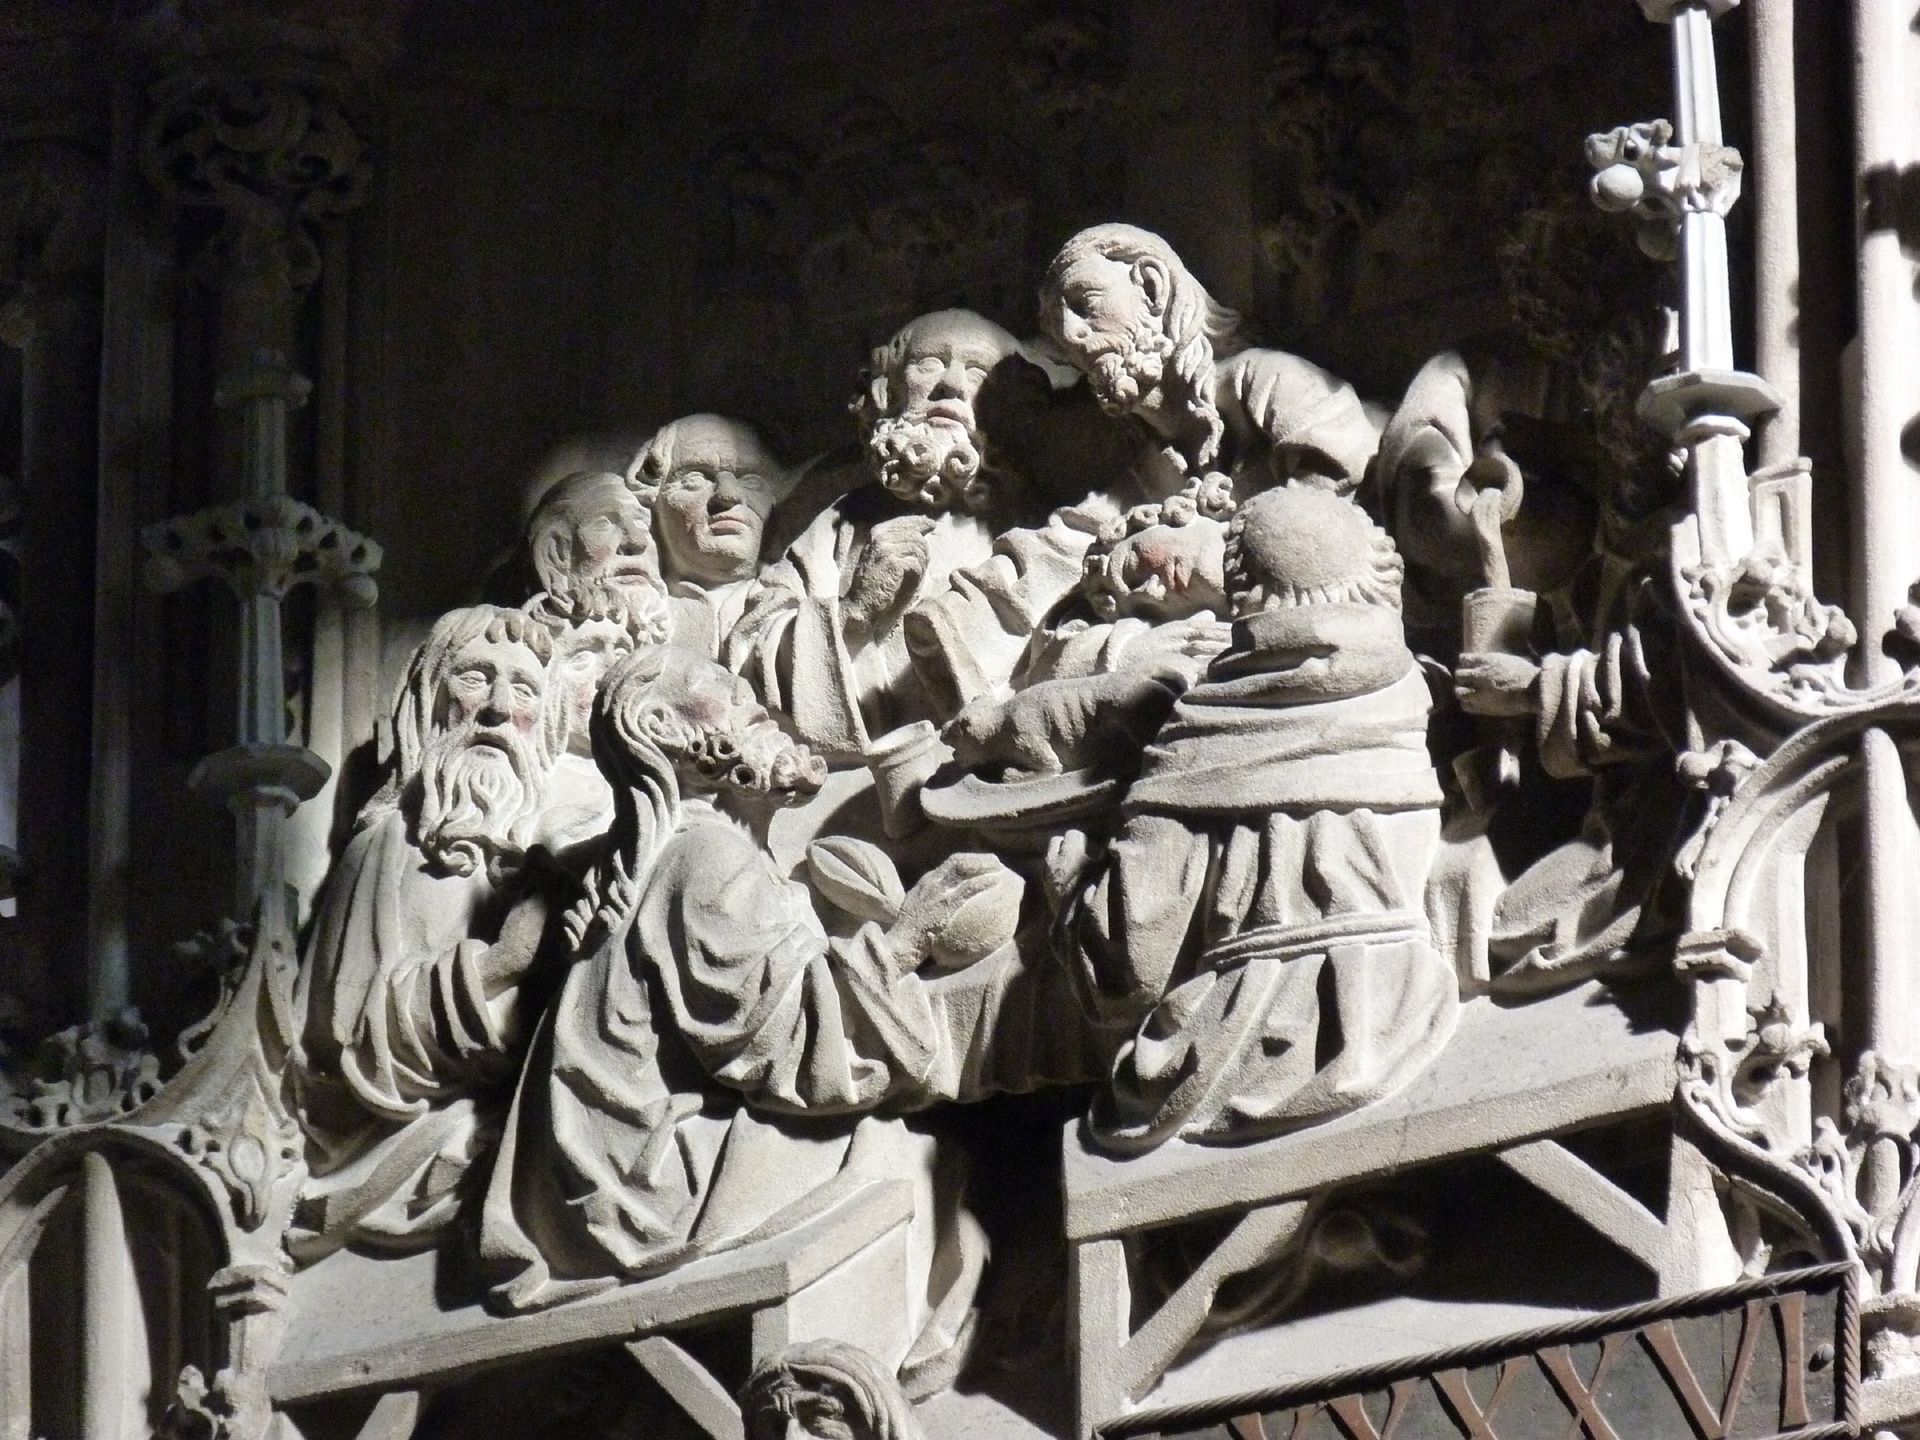 Tabernacle The Last Supper, detail